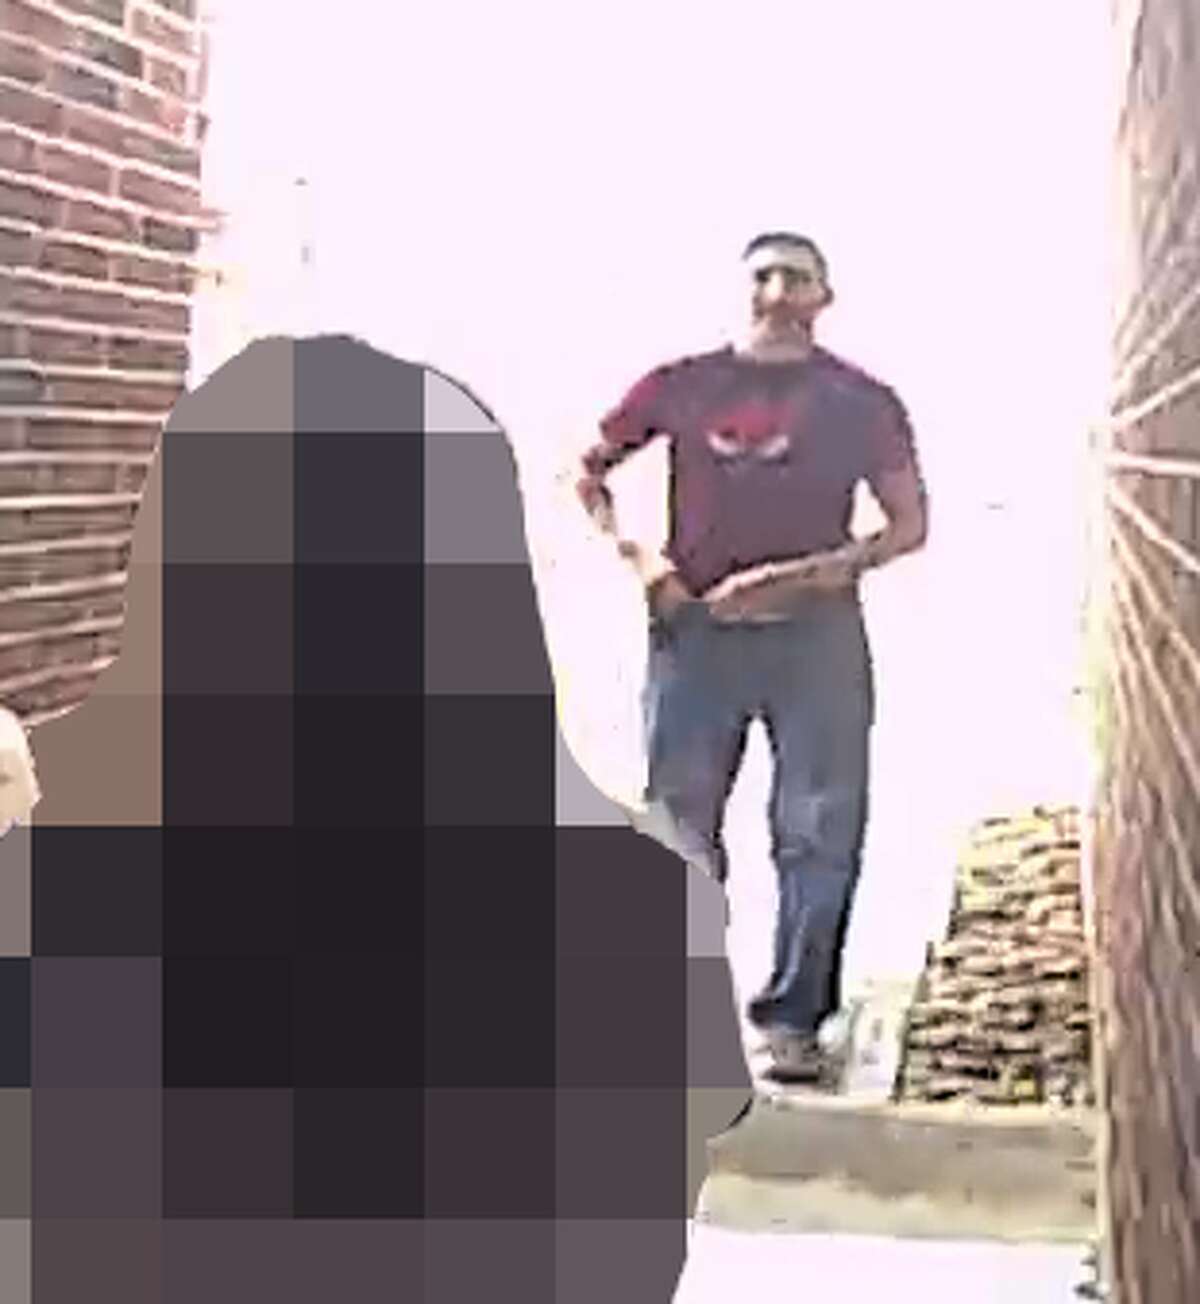 A man who allegedly sexually assaulted a child in League City is seen on home surveillance camera December 8, 2019. Anyone with information is asked to call League City Police Detective Tisdale at 281-338-4189 or Houston Crime Stoppers at 713-222-ADVICE (8477).